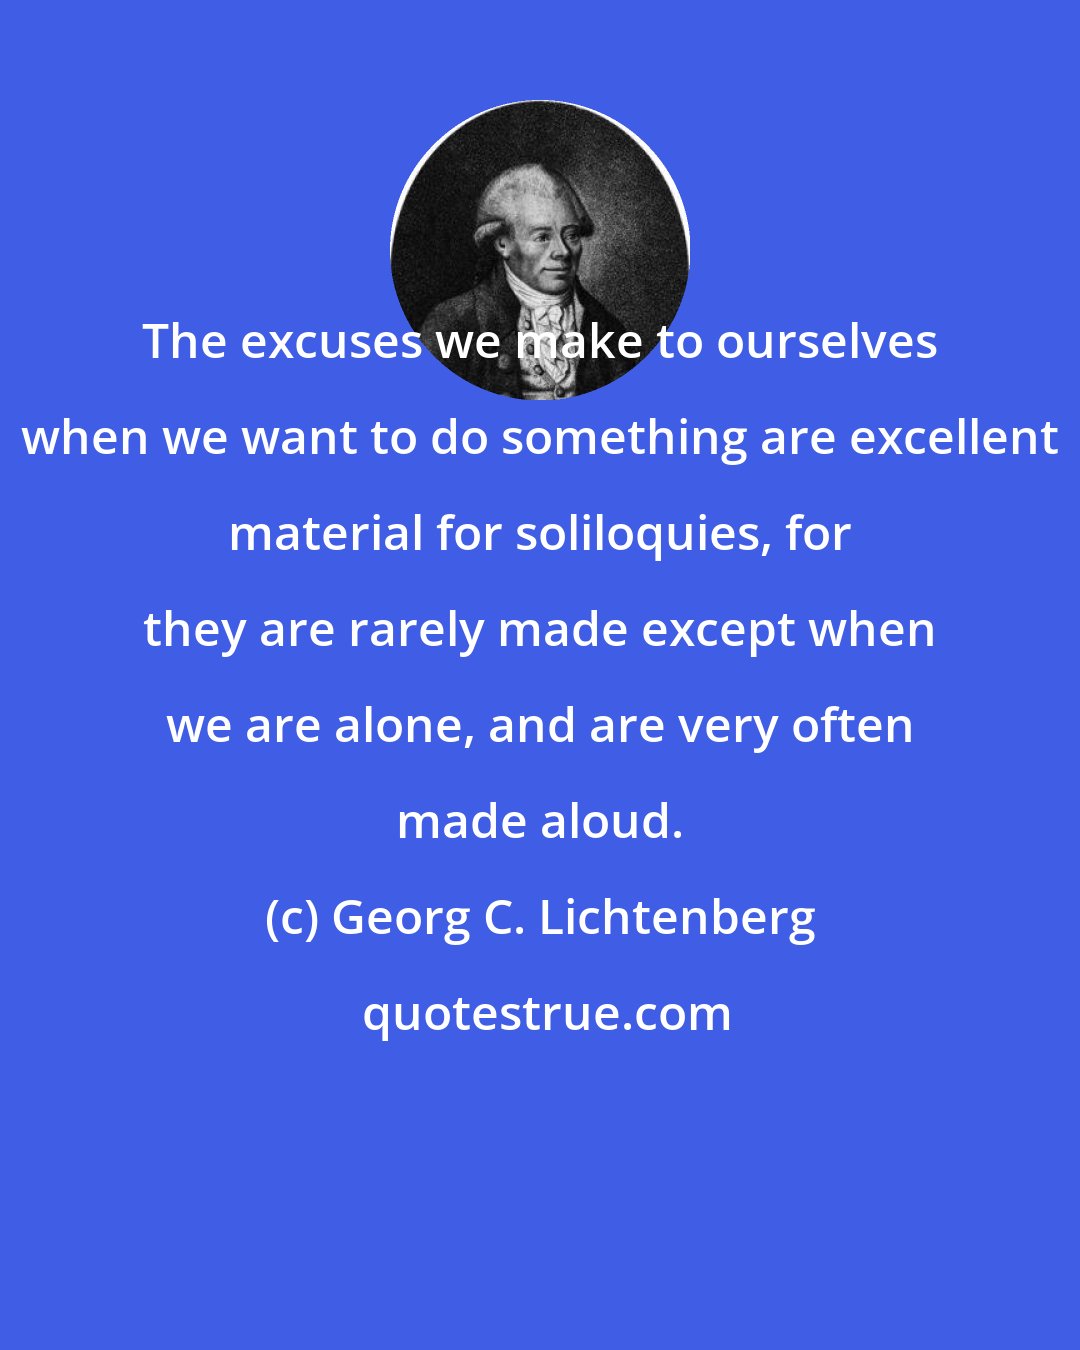 Georg C. Lichtenberg: The excuses we make to ourselves when we want to do something are excellent material for soliloquies, for they are rarely made except when we are alone, and are very often made aloud.